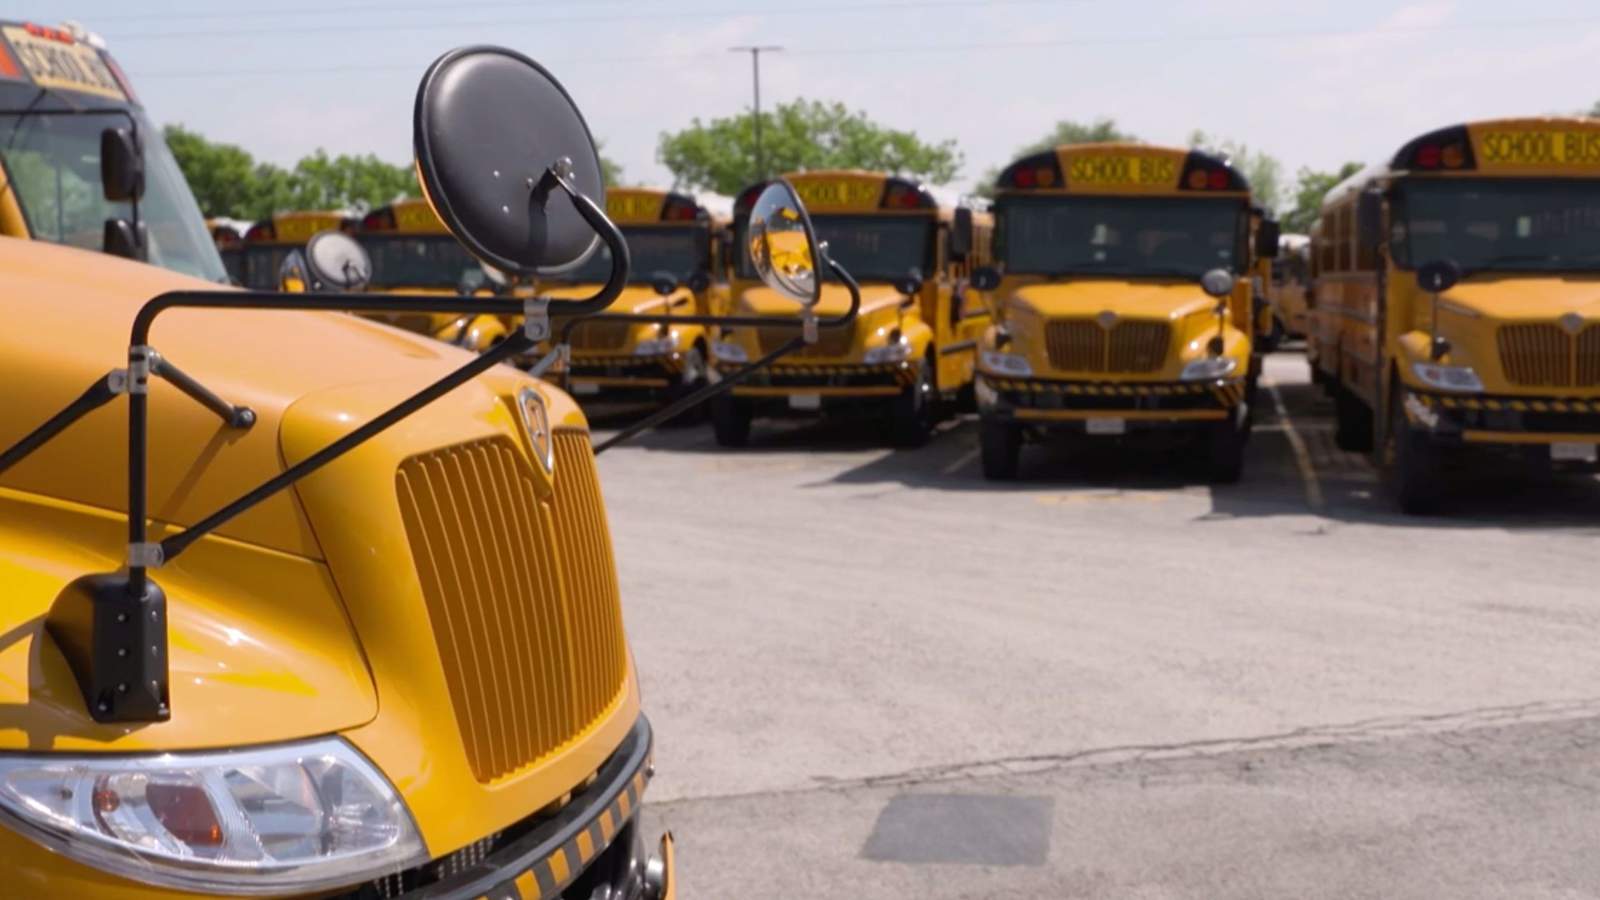 Social distancing on a school bus? Parents raise concerns about transportation this fall